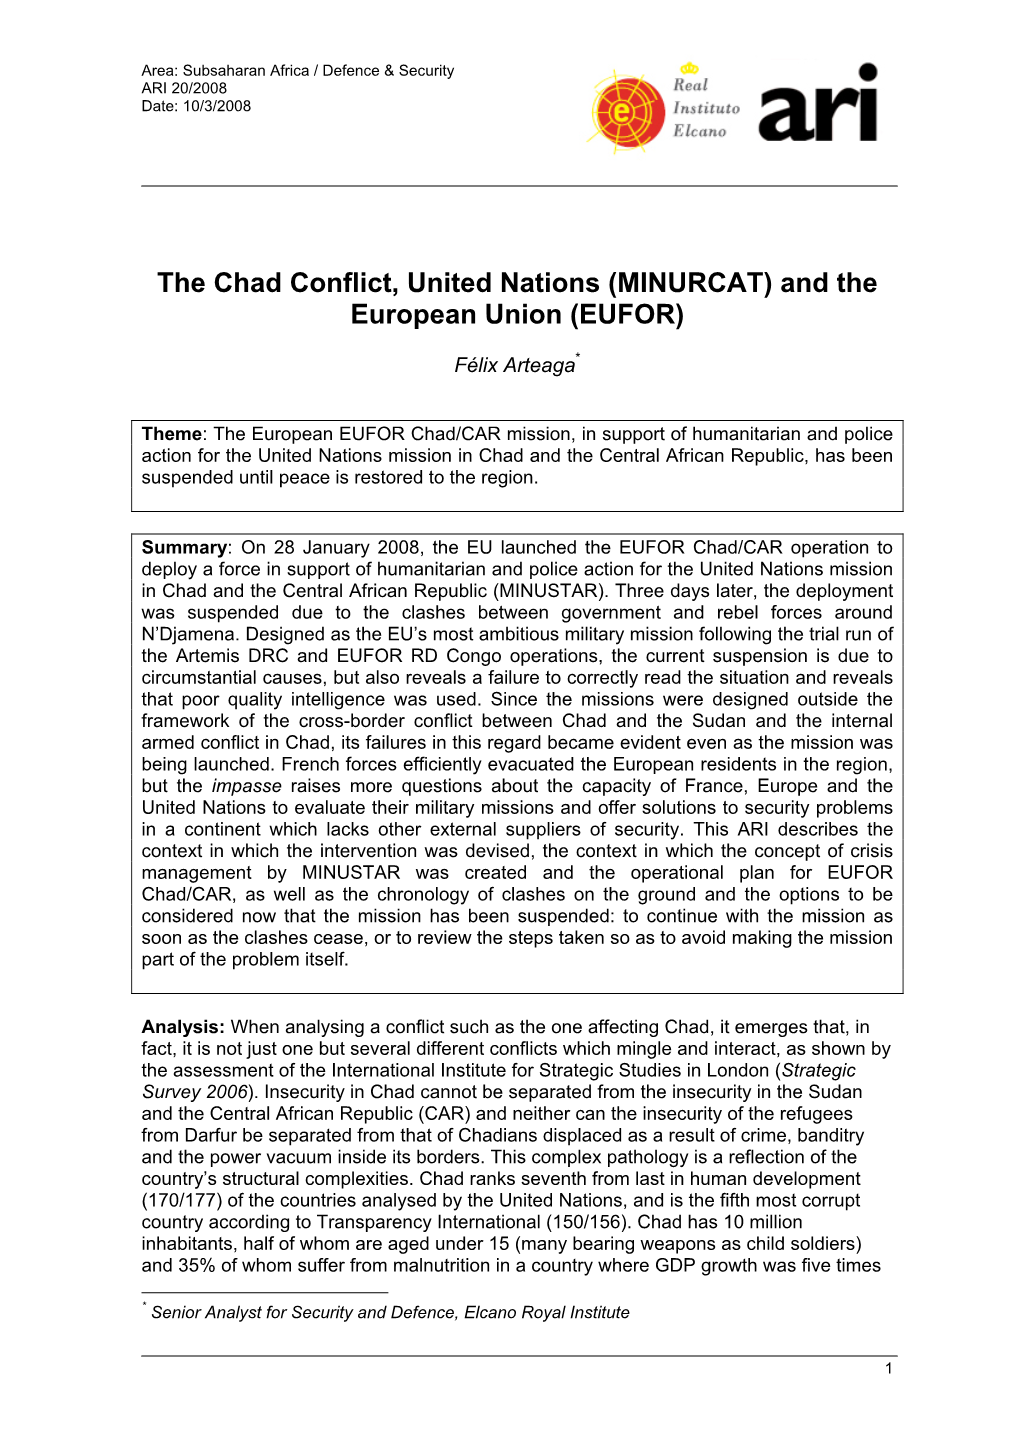 The Chad Conflict, United Nations (MINURCAT) and the European Union (EUFOR)